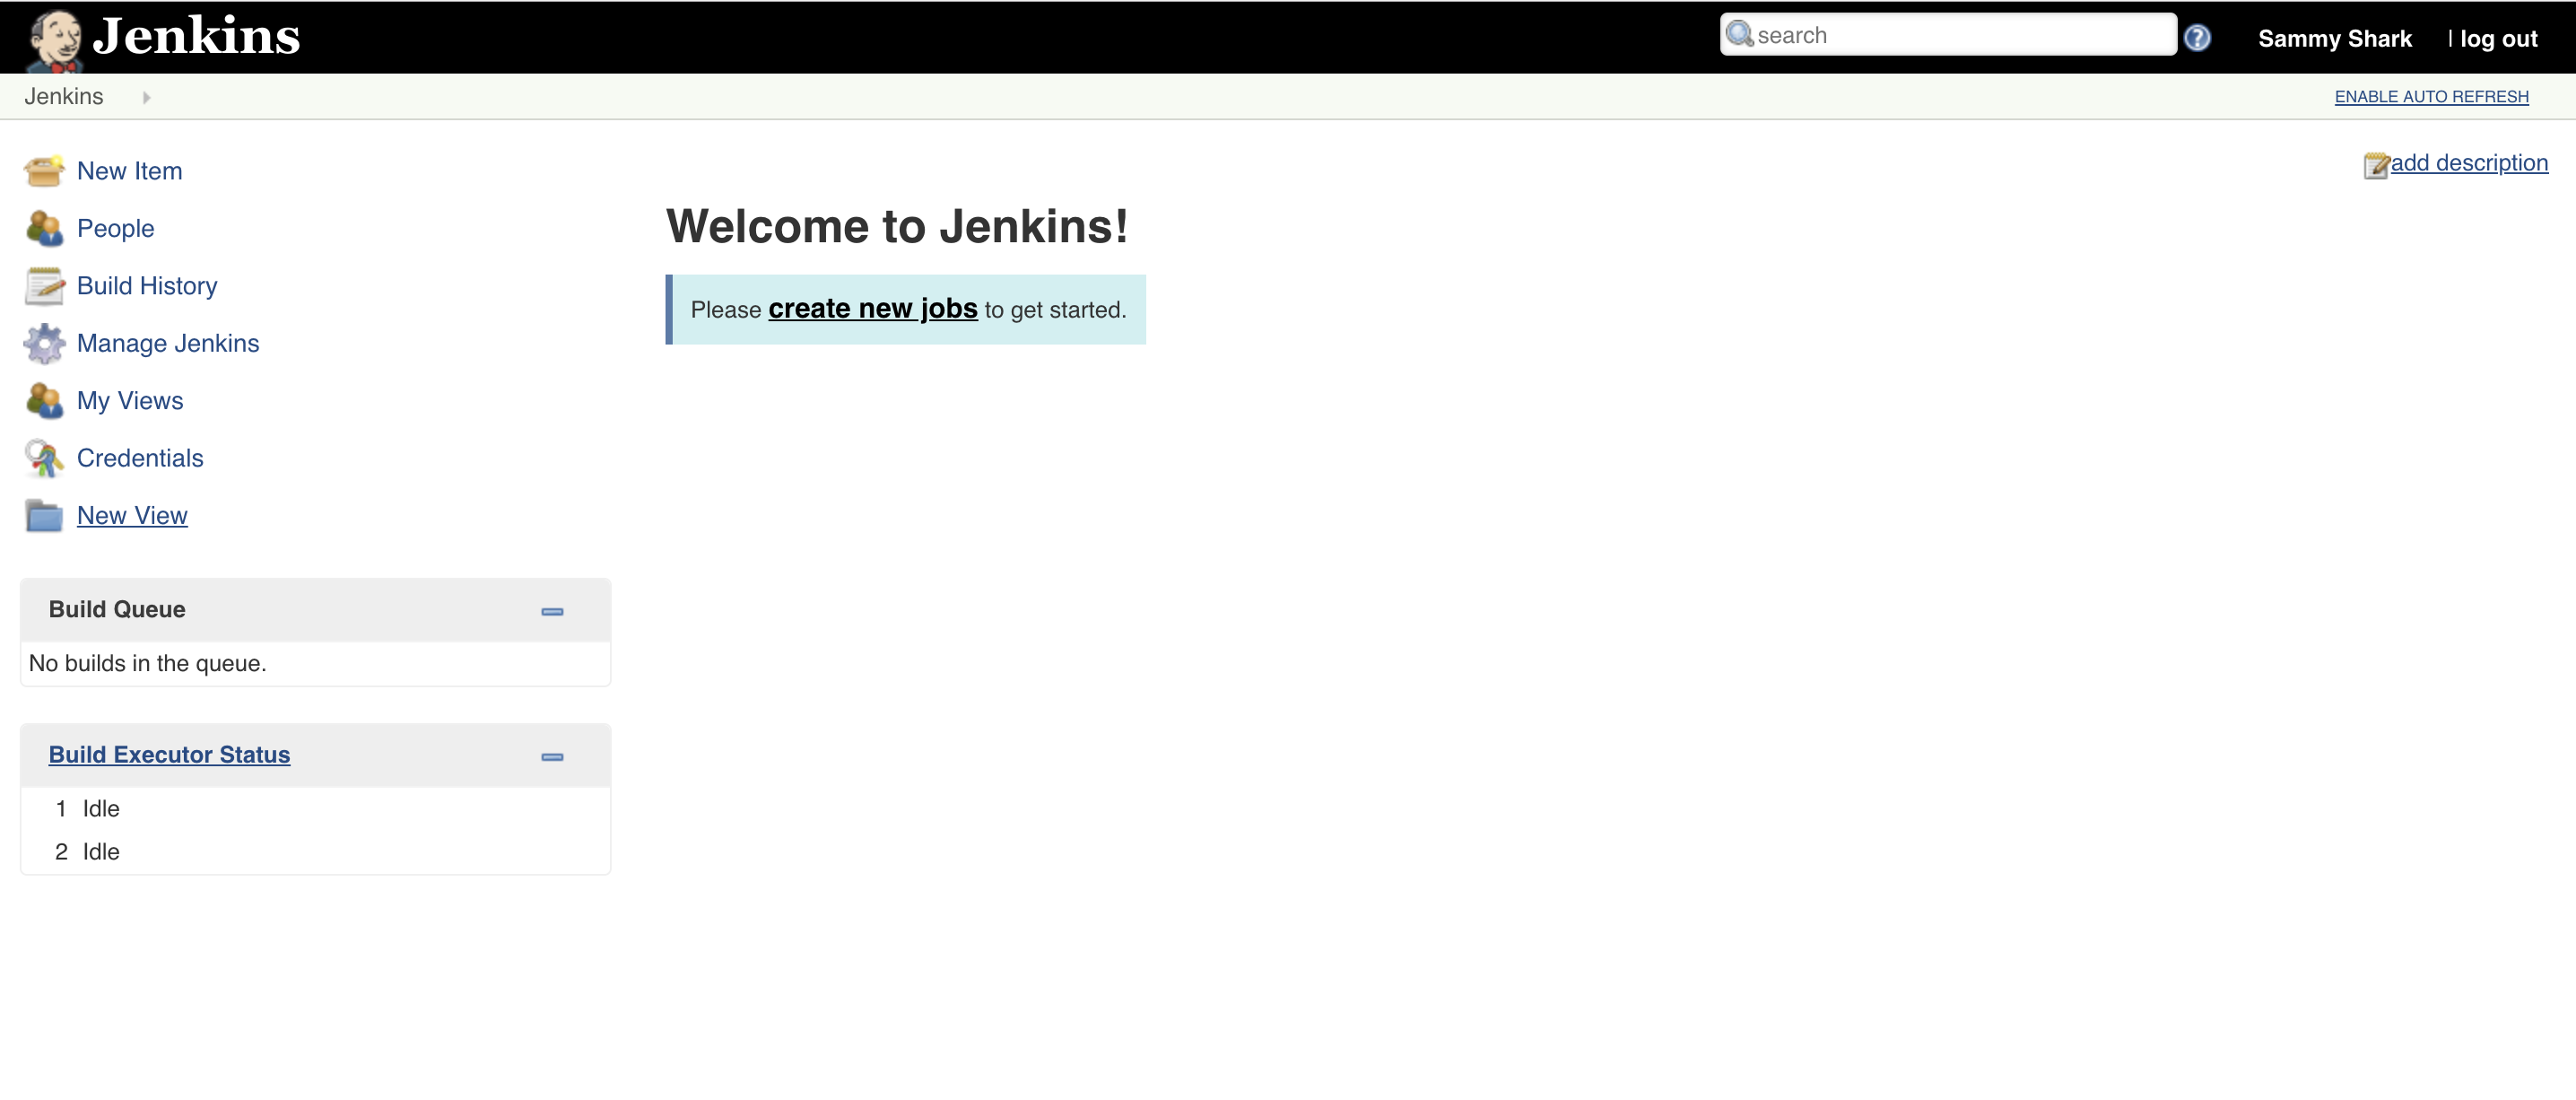 Welcome to Jenkins Screen